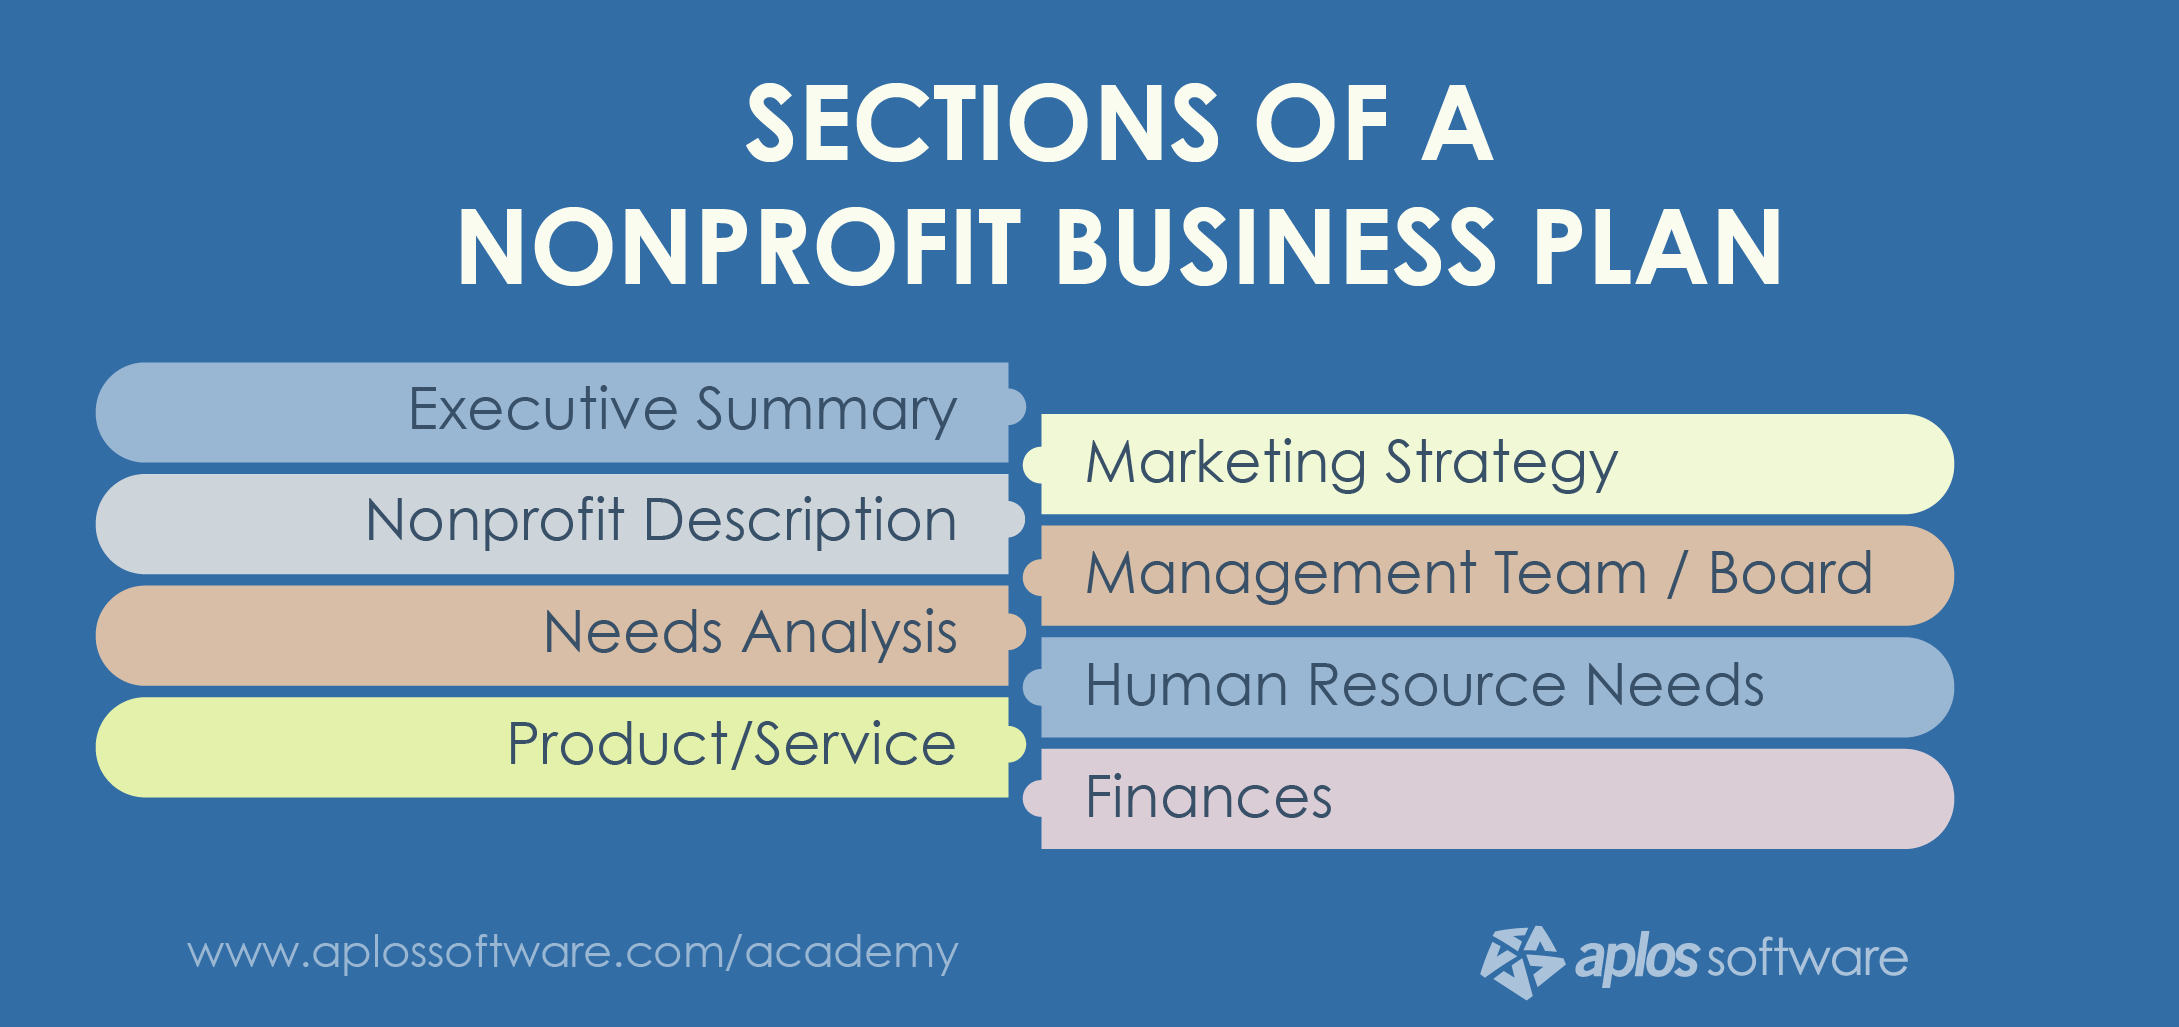 How To Write A Nonprofit Business Plan - Aplos Training Center Intended For Sample Non Profit Business Plan Template